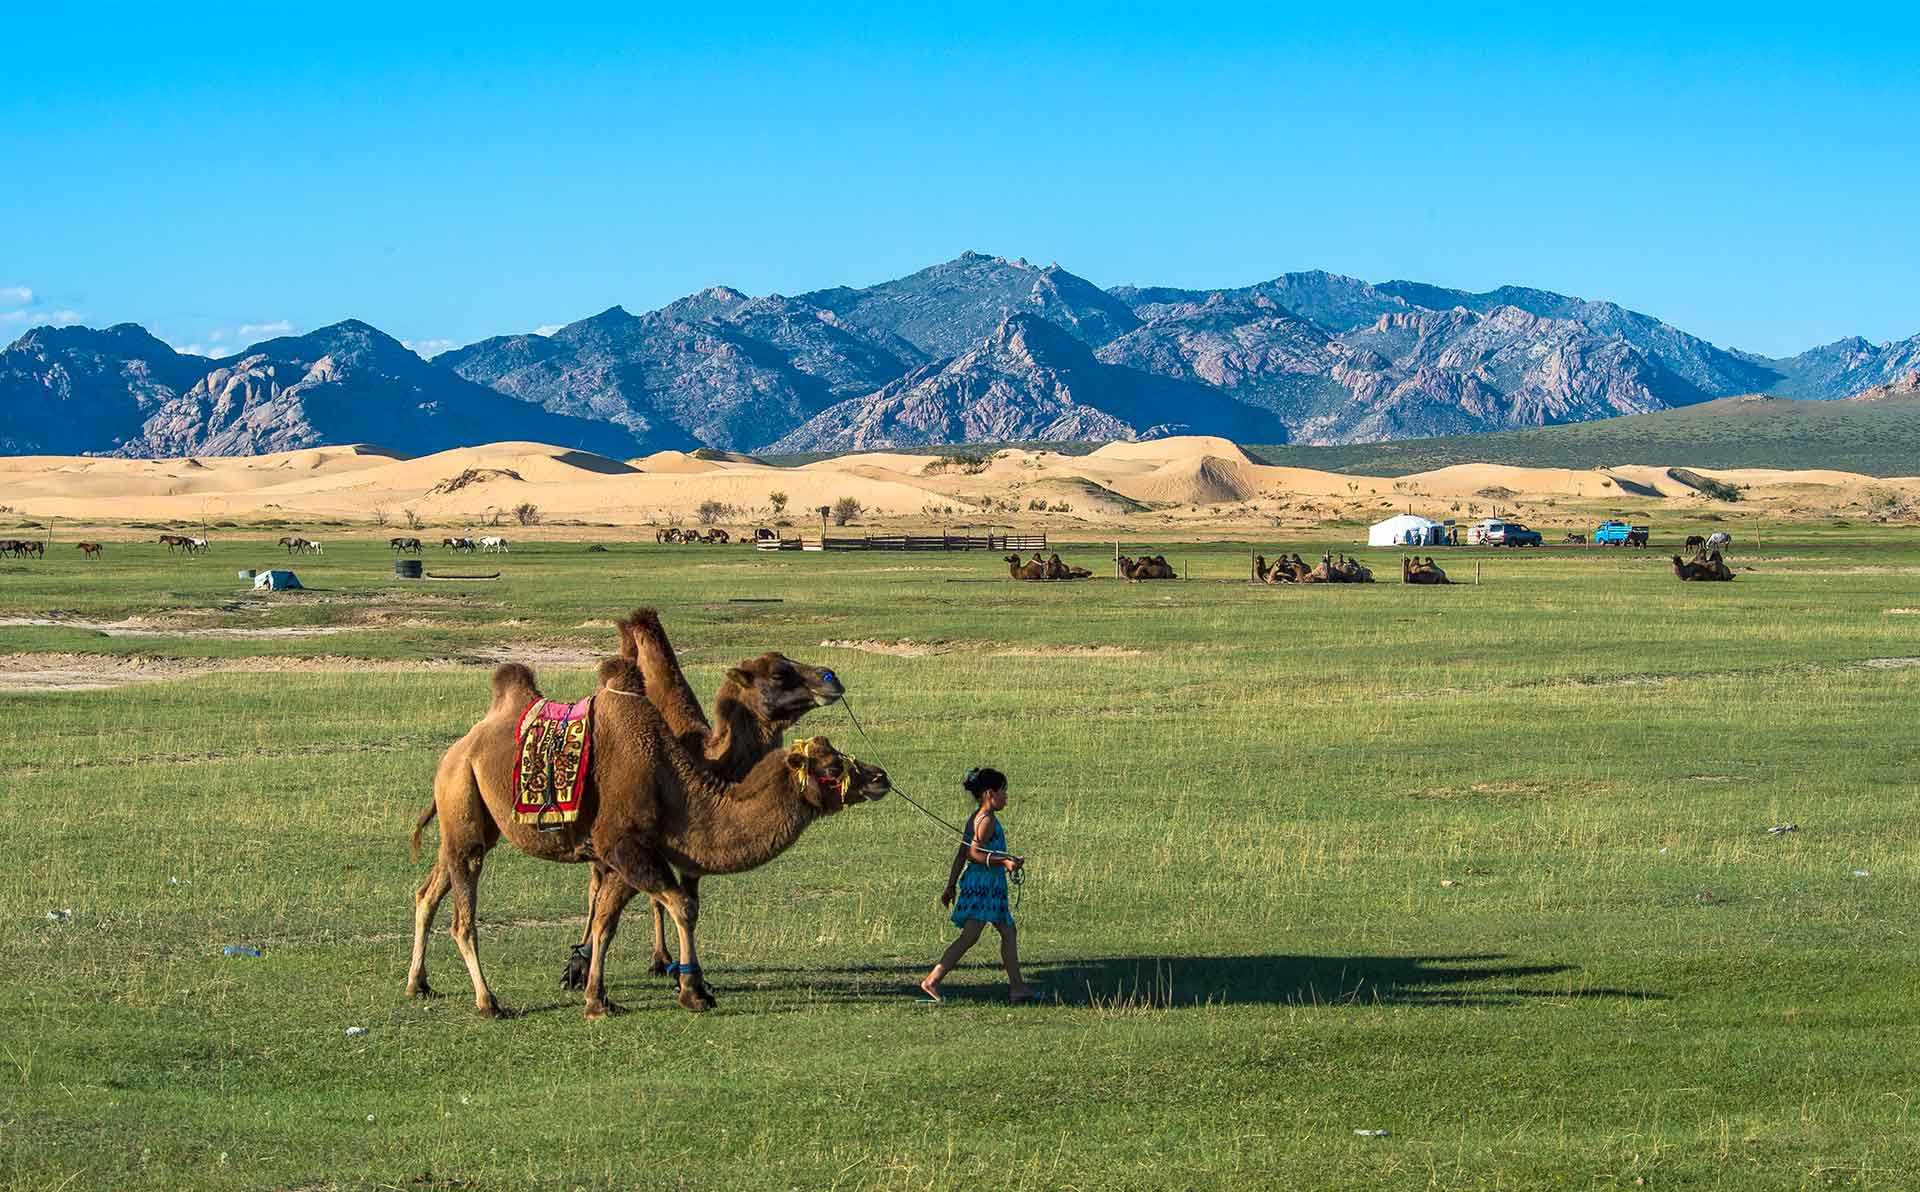 10 things to do in Mongolia